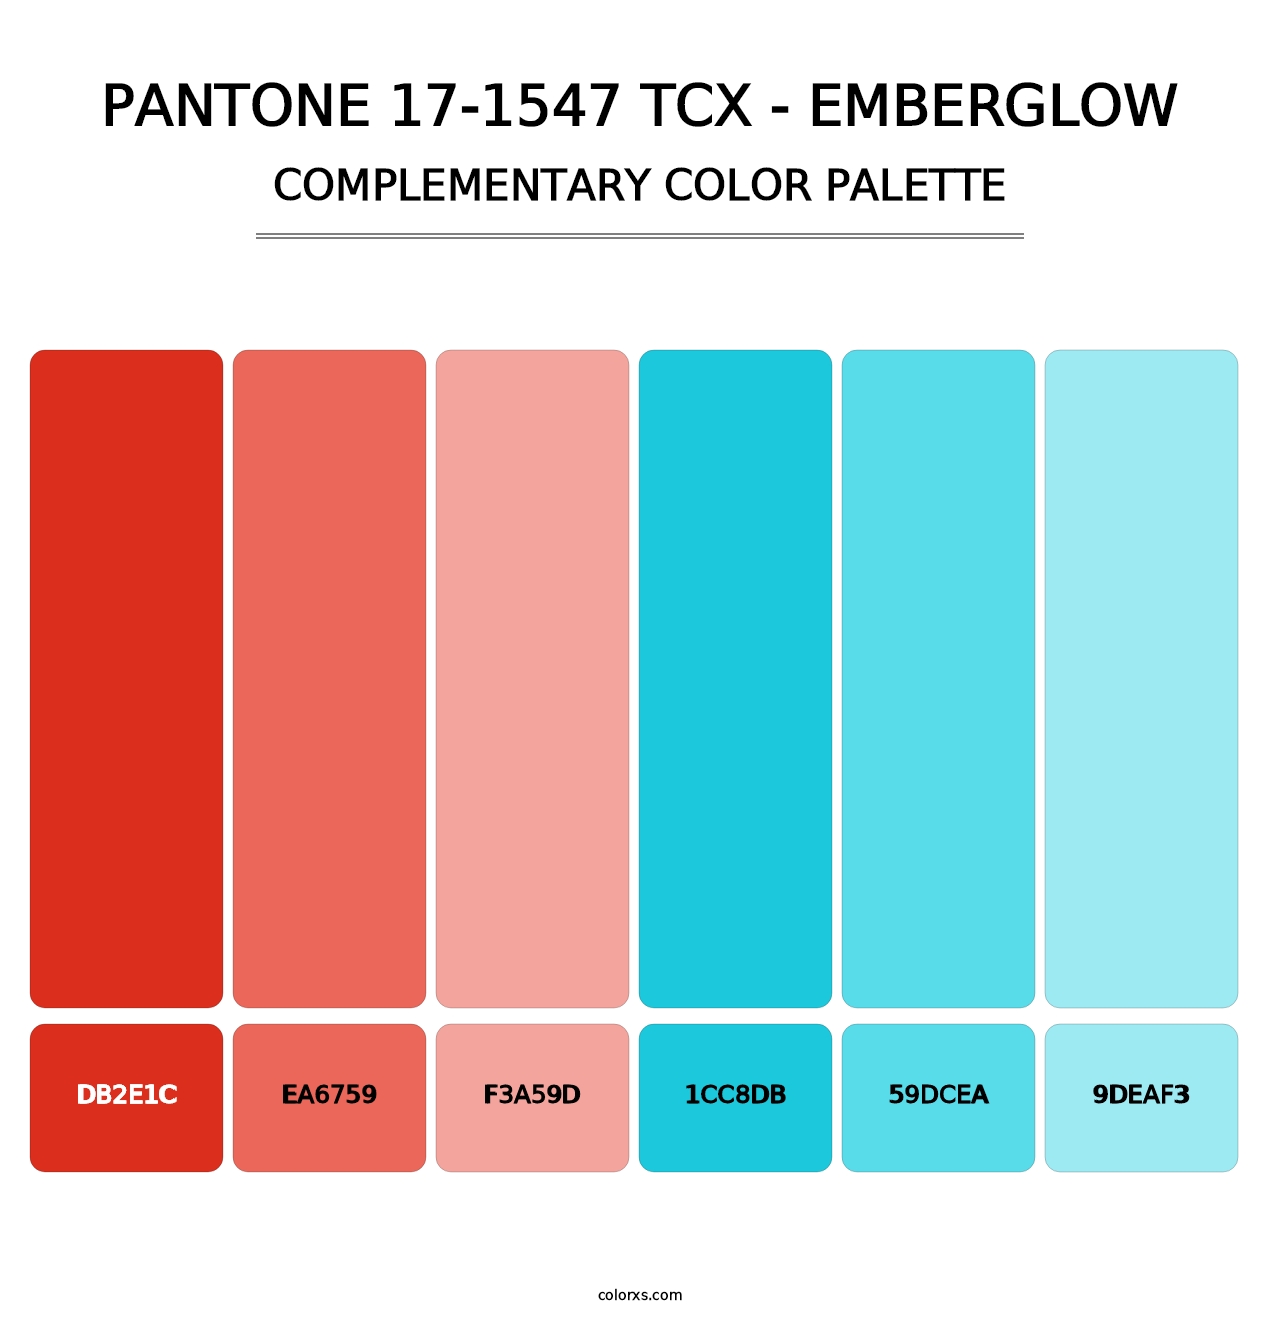 PANTONE 17-1547 TCX - Emberglow - Complementary Color Palette